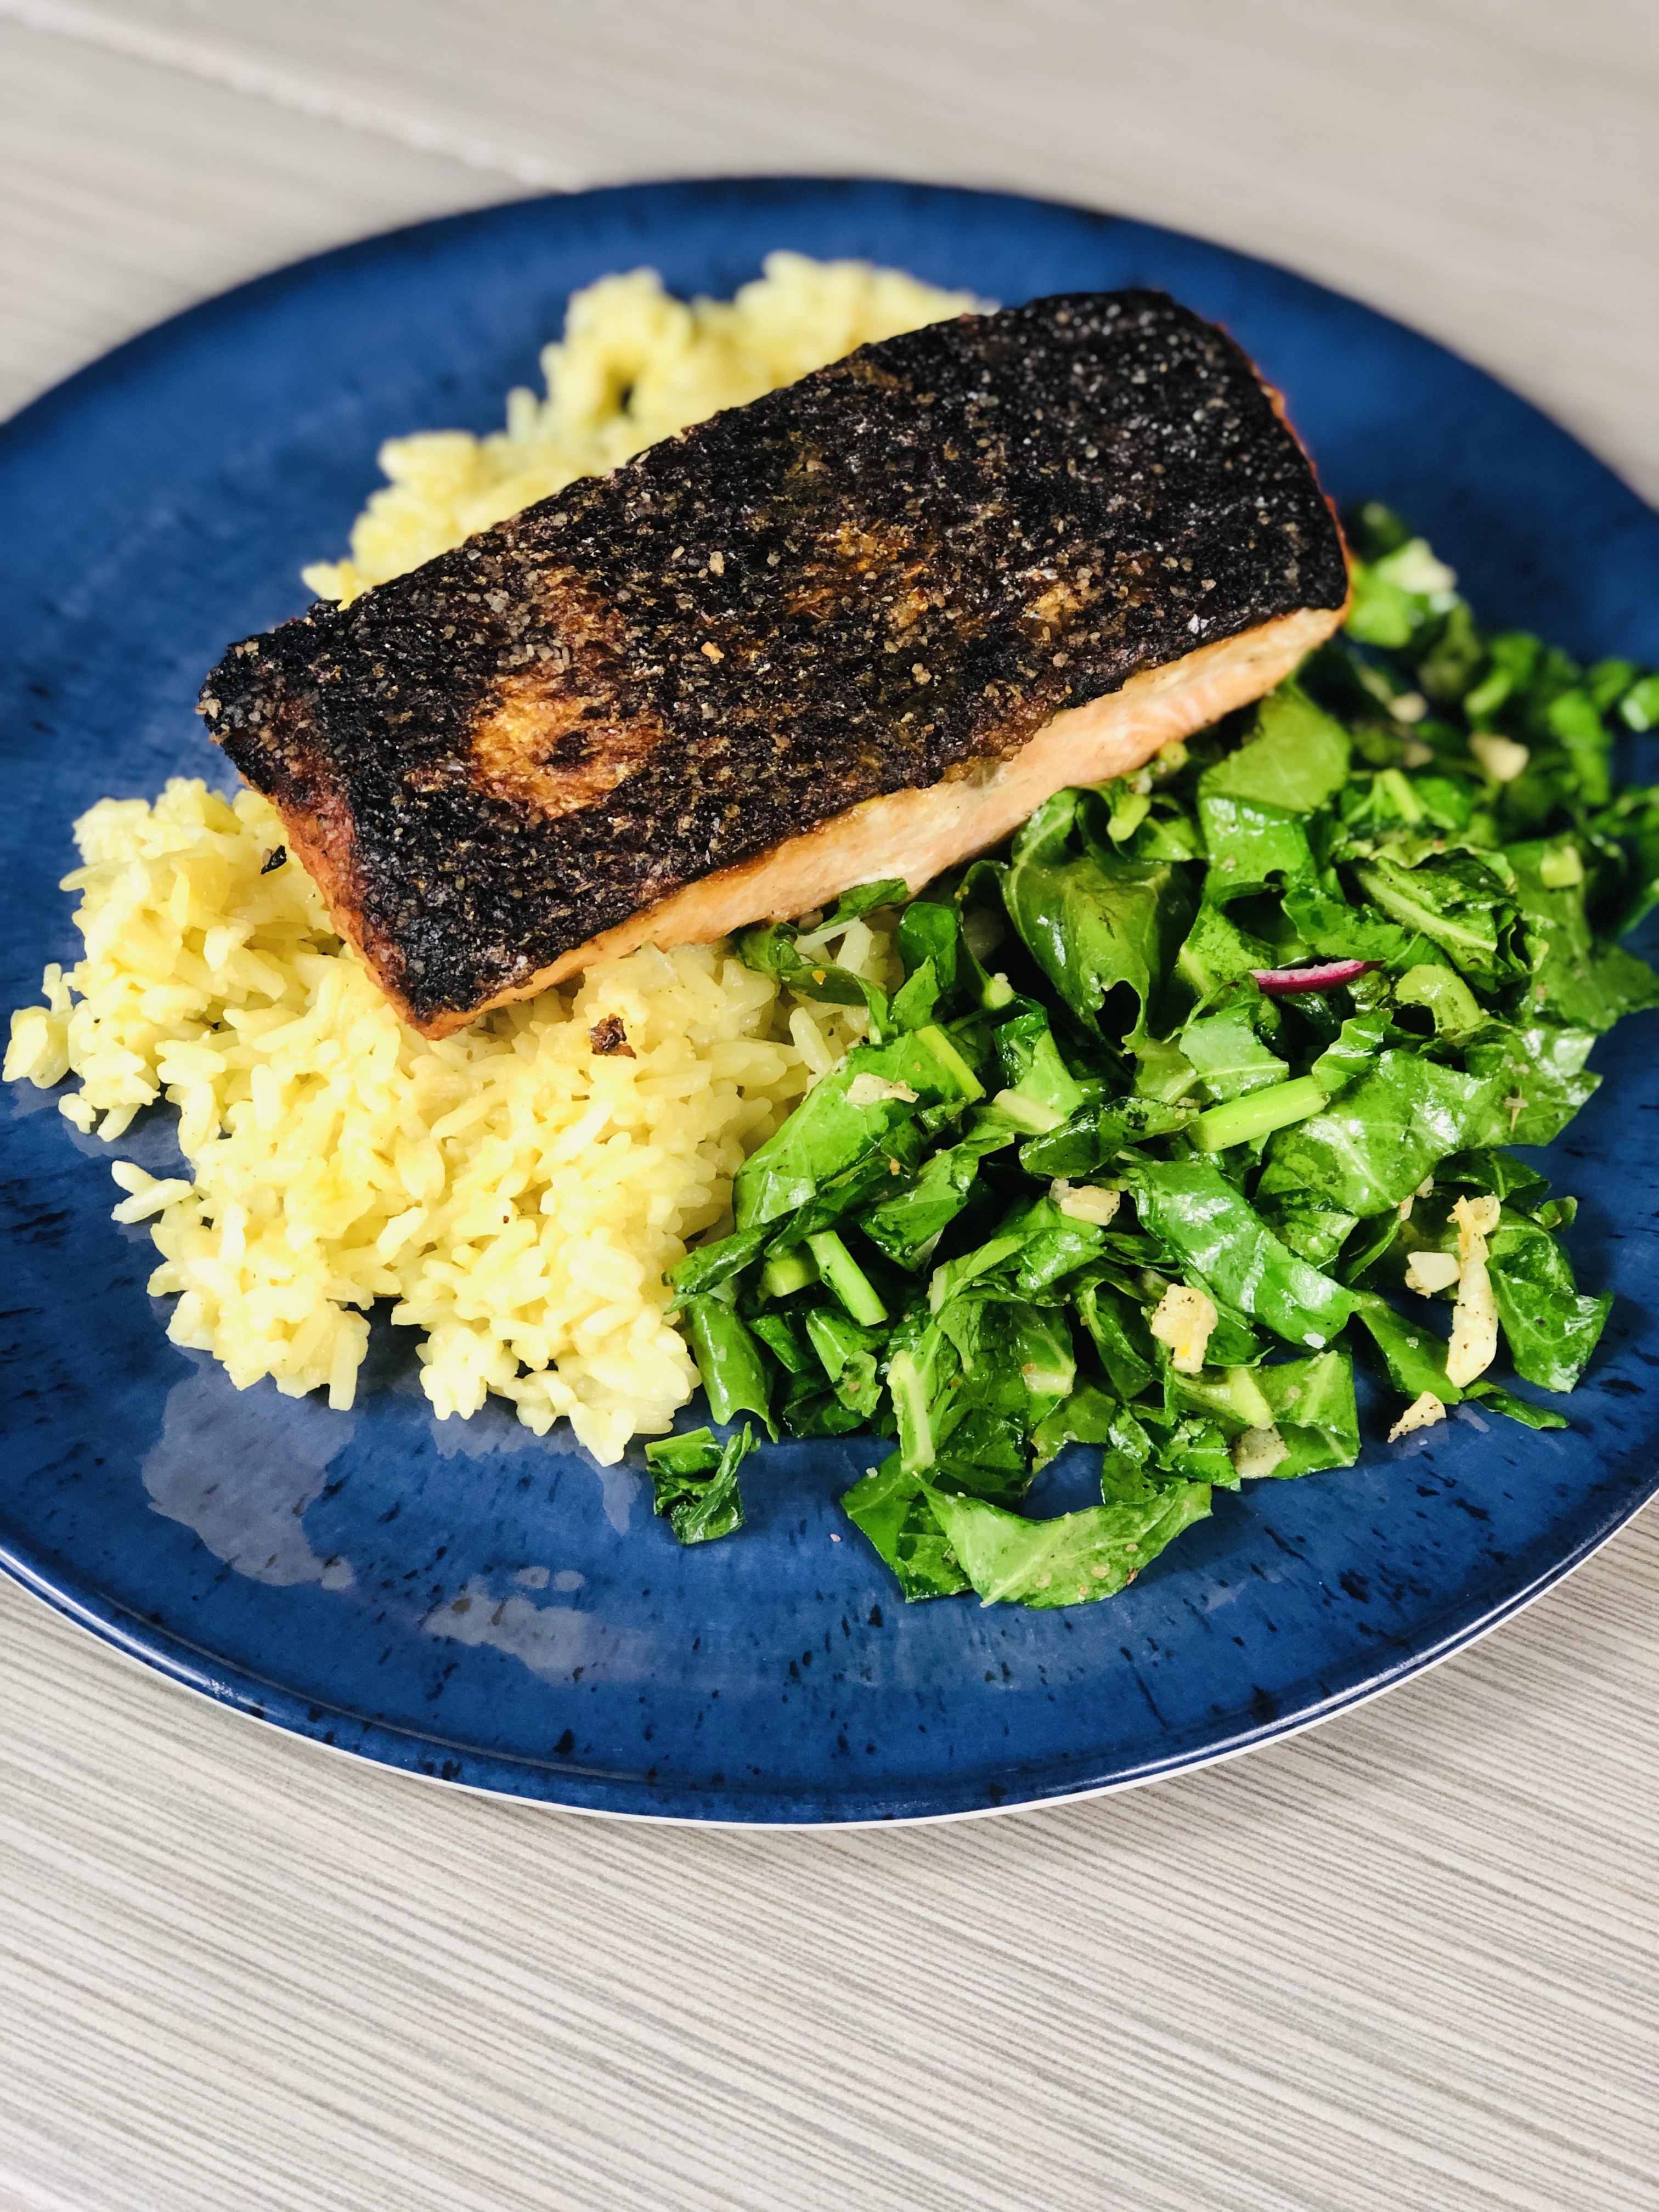 Crispy skin salmon served on a bed of rice pilaf with a side of sauteed kohlrabi